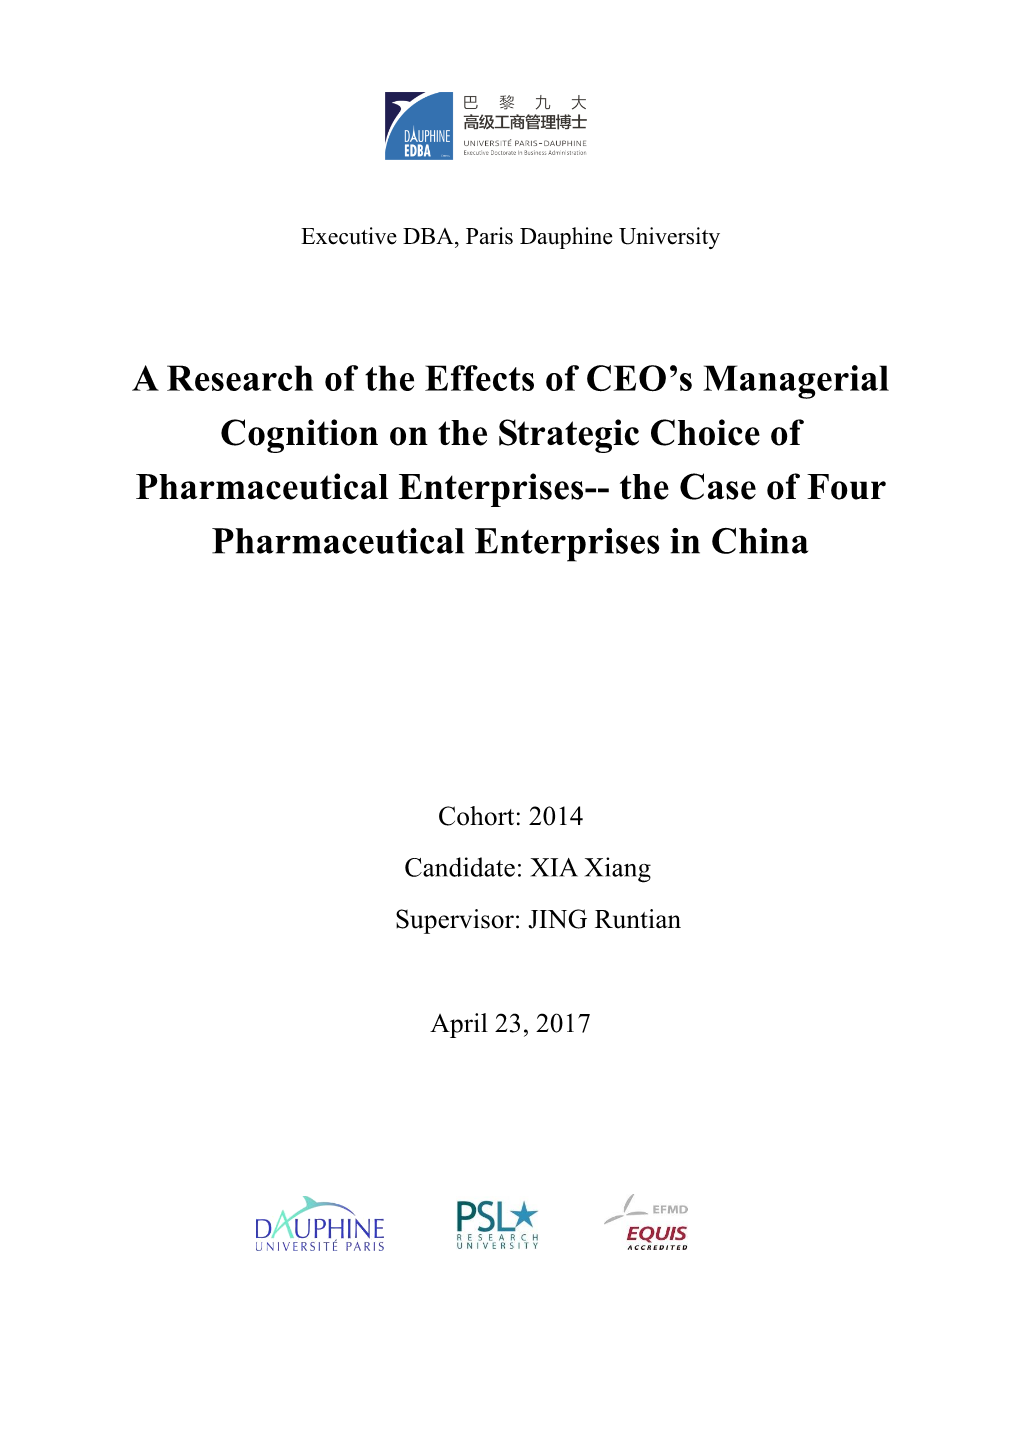 A Research of the Effects of CEO's Managerial Cognition on The